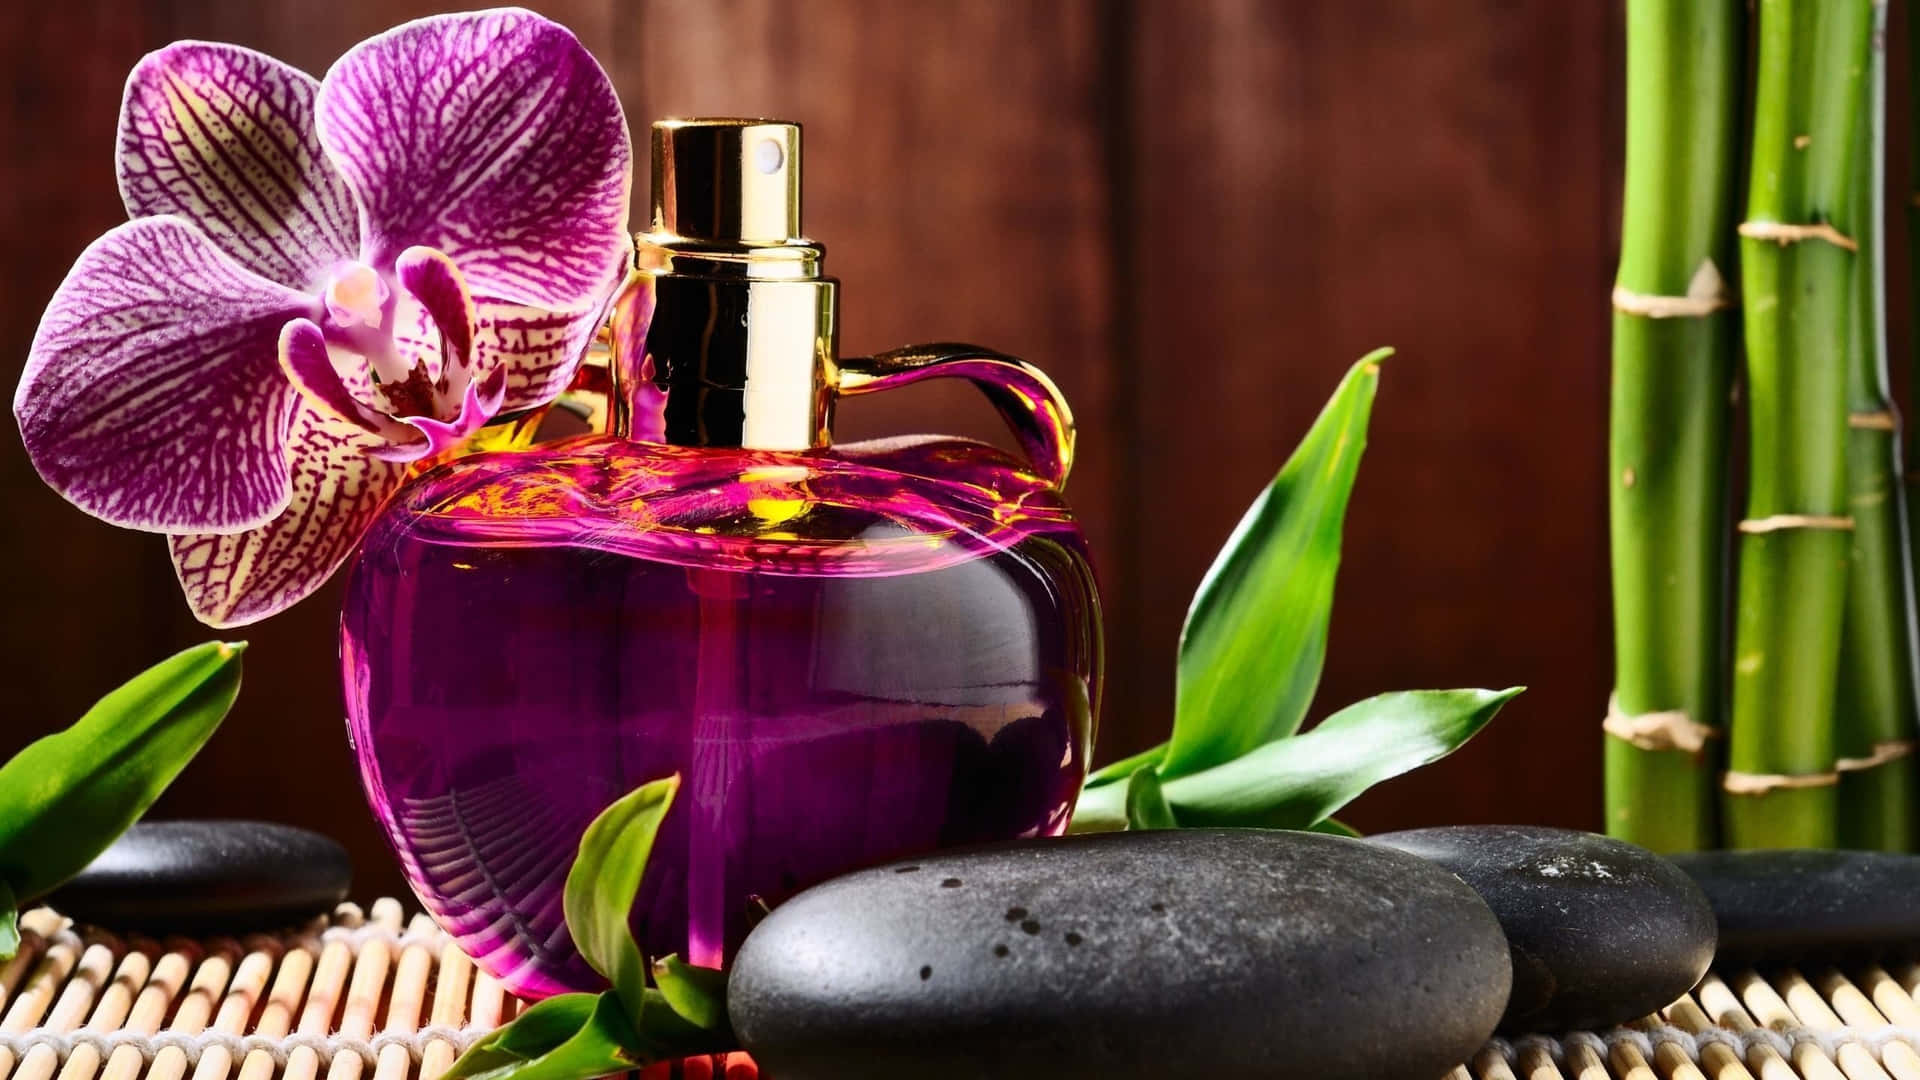 Smelling the Sweet, Floral Aroma of Fragrance. Wallpaper